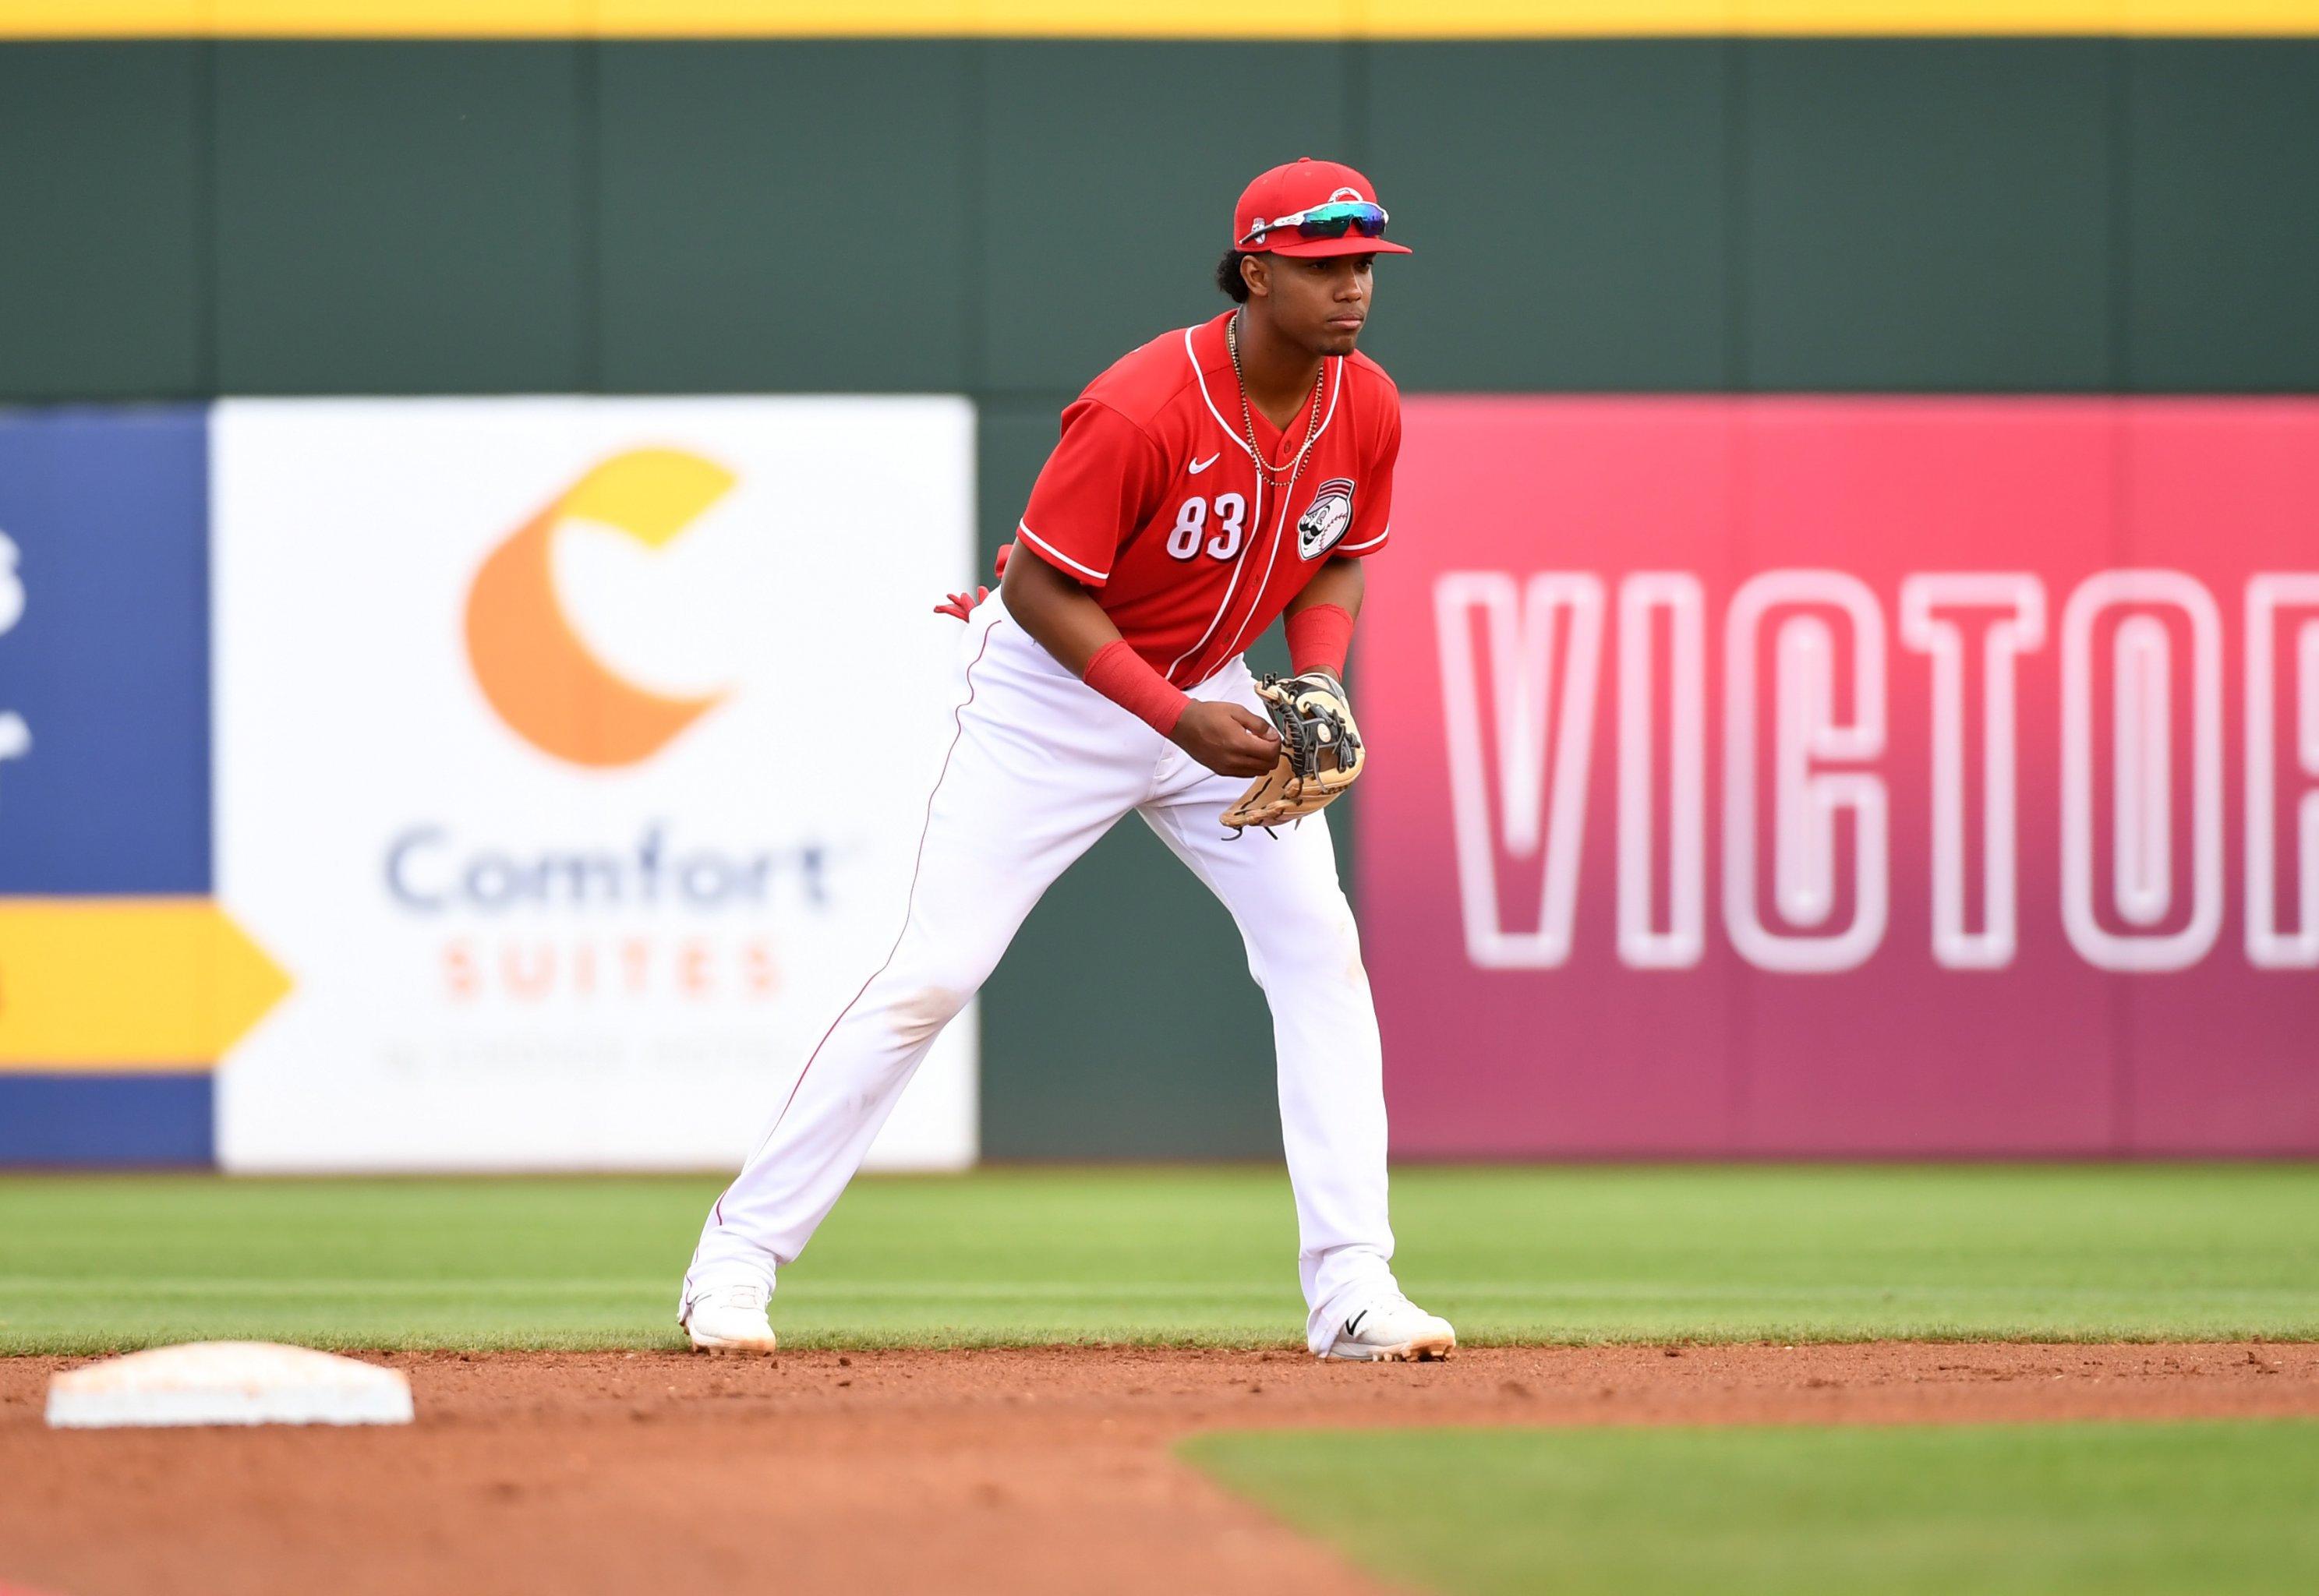 CJ Abrams is the new shortstop. He brings a needed dynamic to a lacking  infield.